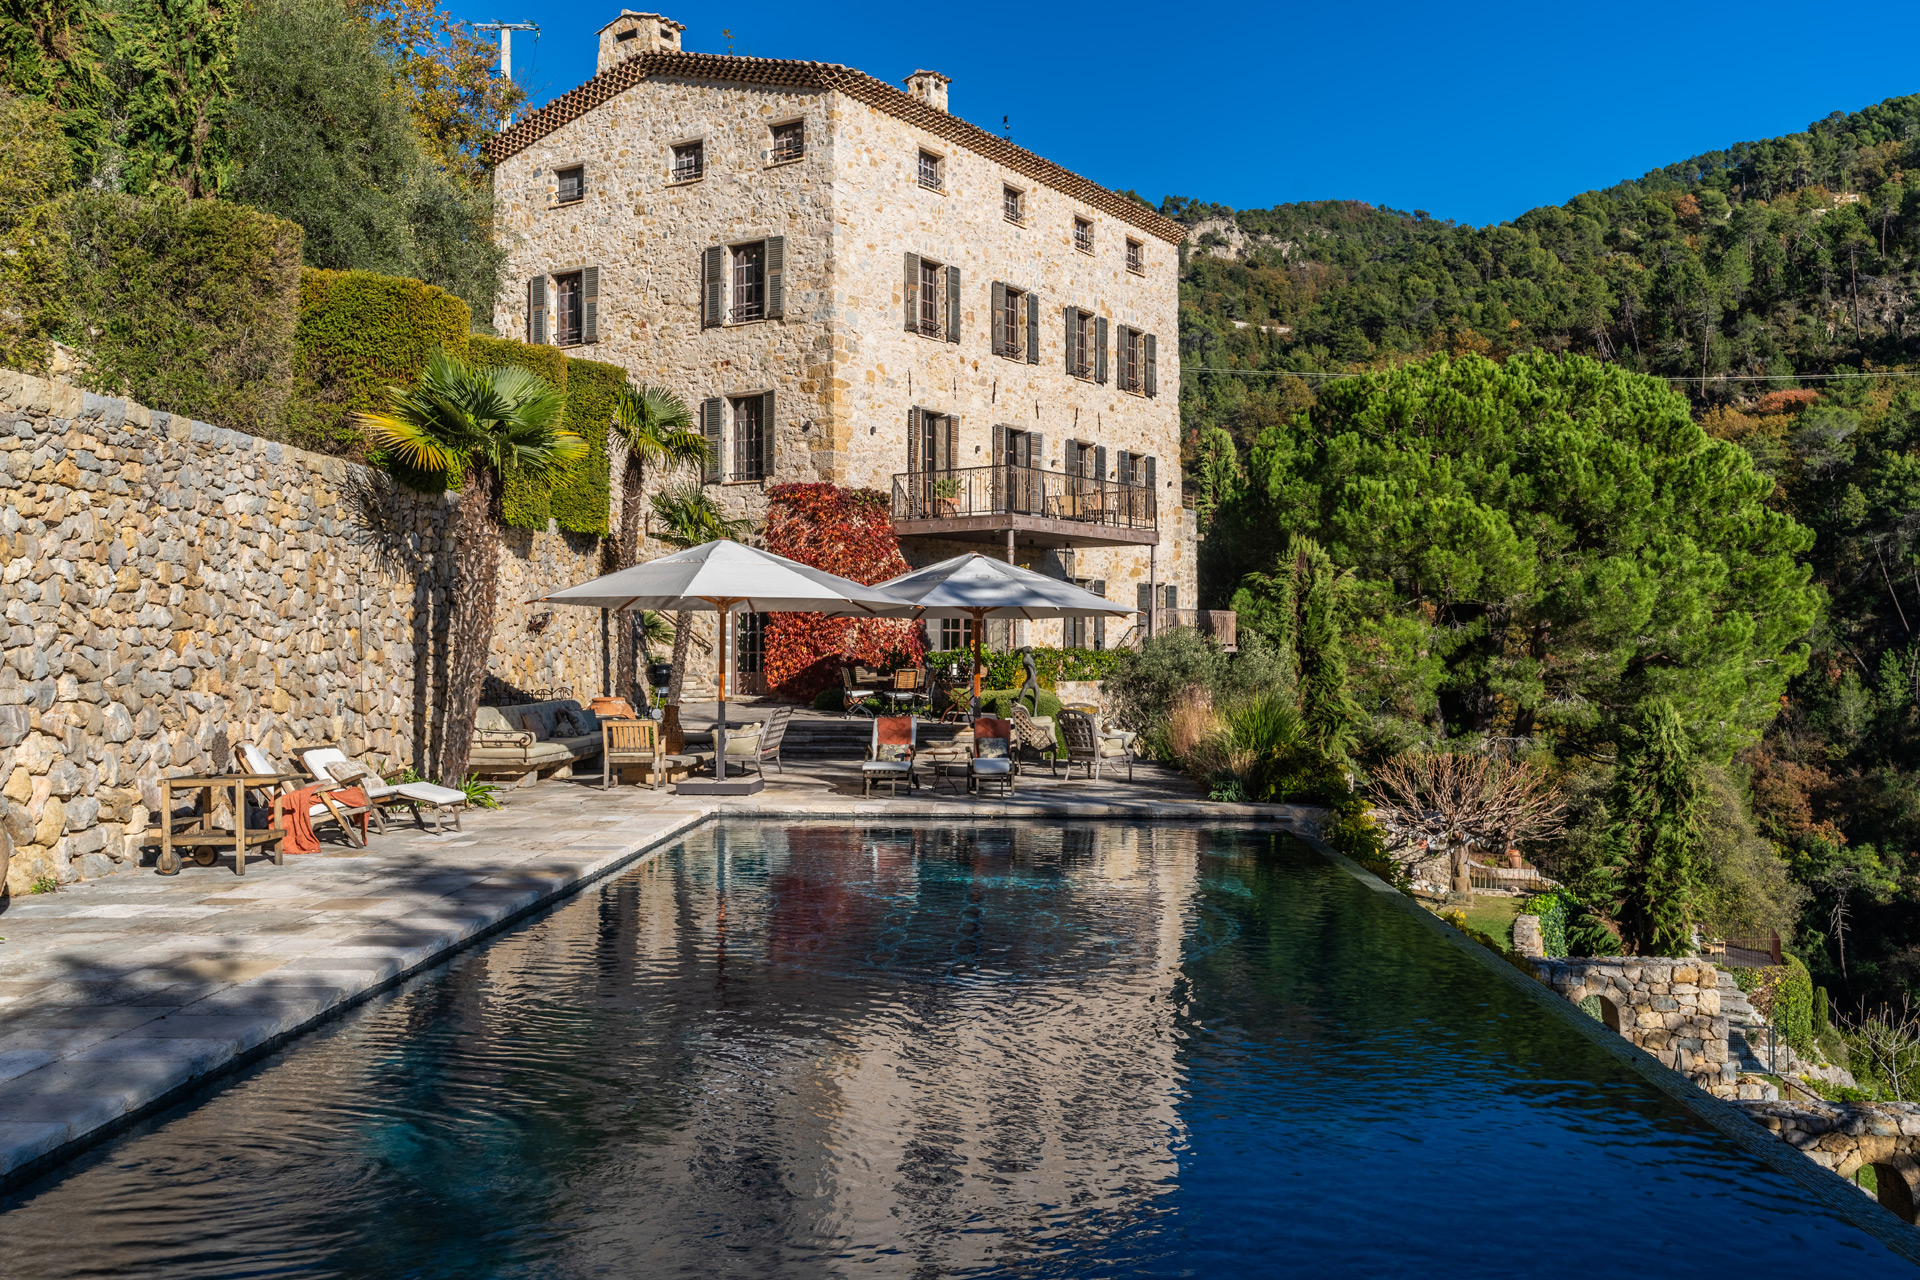 Converted mill with swimming pool and view of surrounding hils.